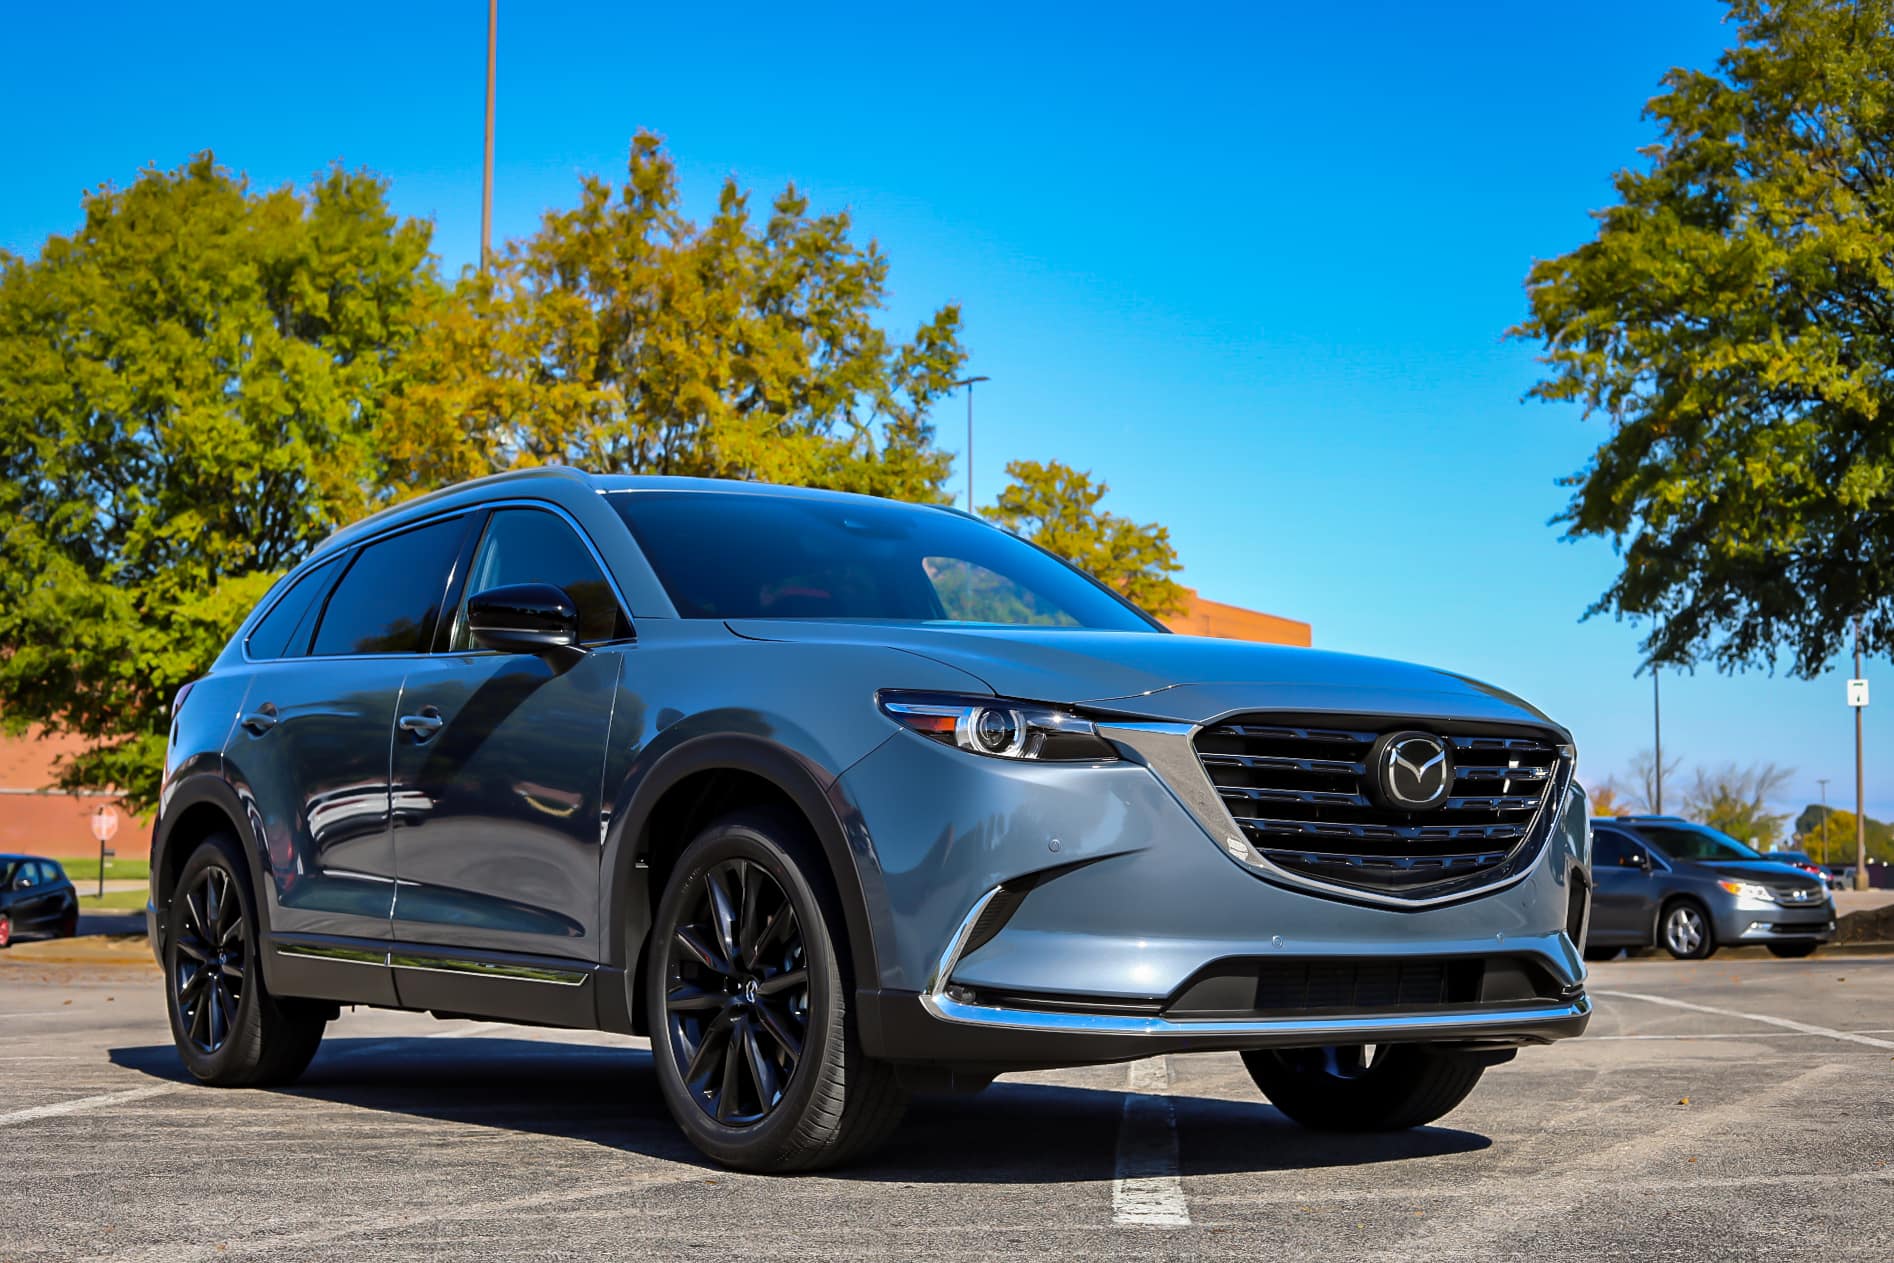 2021 Mazda CX-9 Test Drive Review | Nelson Mazda Cool Springs